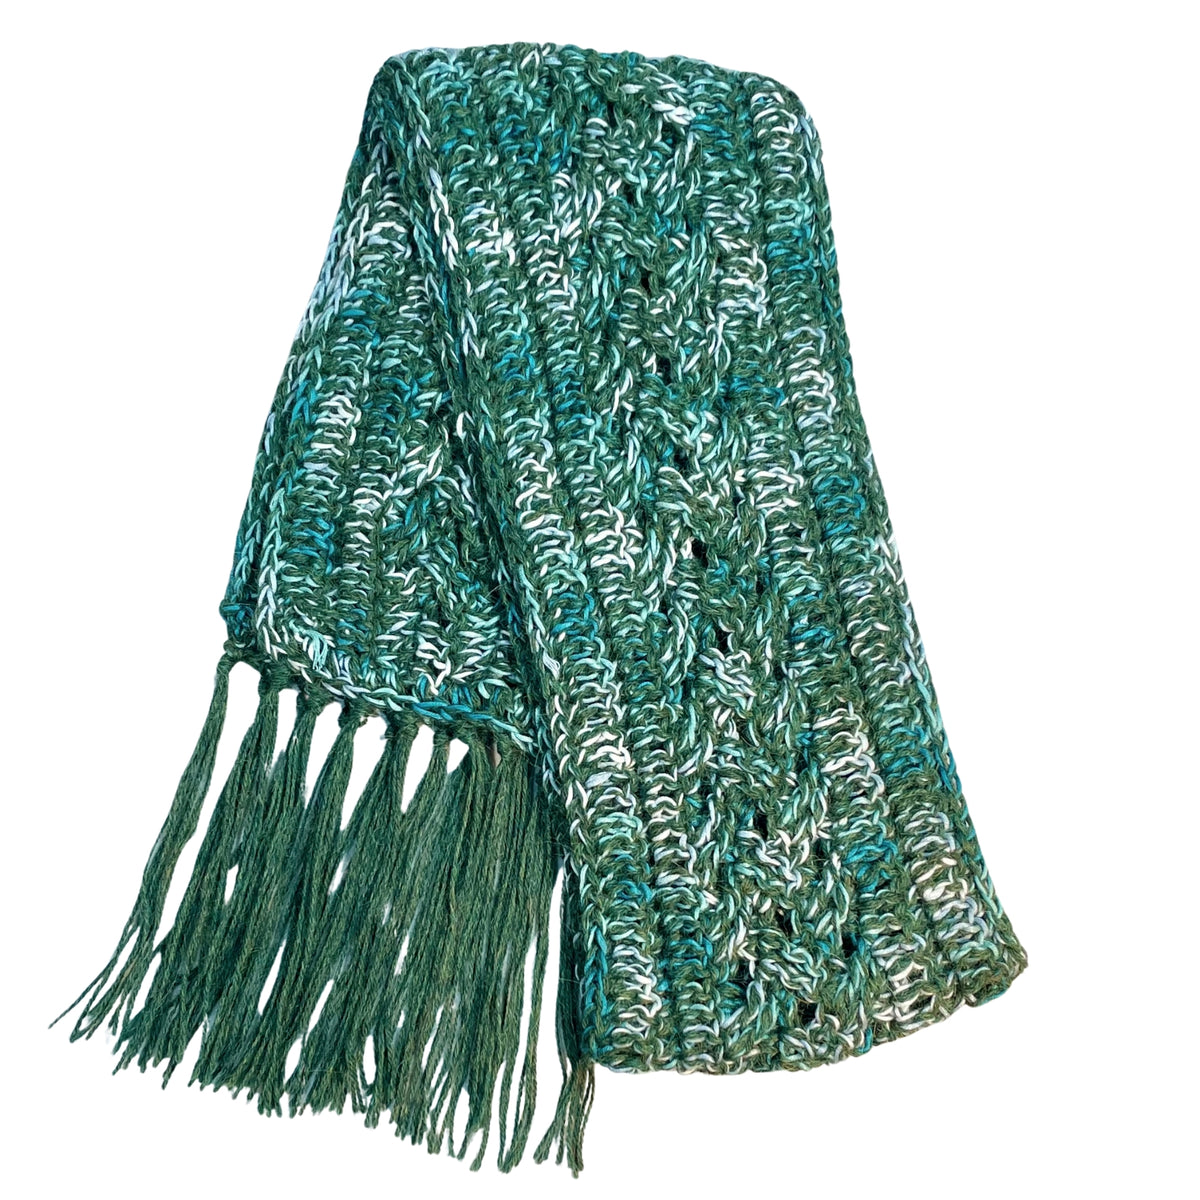 Cozy soft warm alpaca and bamboo scarf for winter fashion. Handmade knitted crochet scarf made from yarn in the colors moss green, teal, turquoise, seafoam, and white.